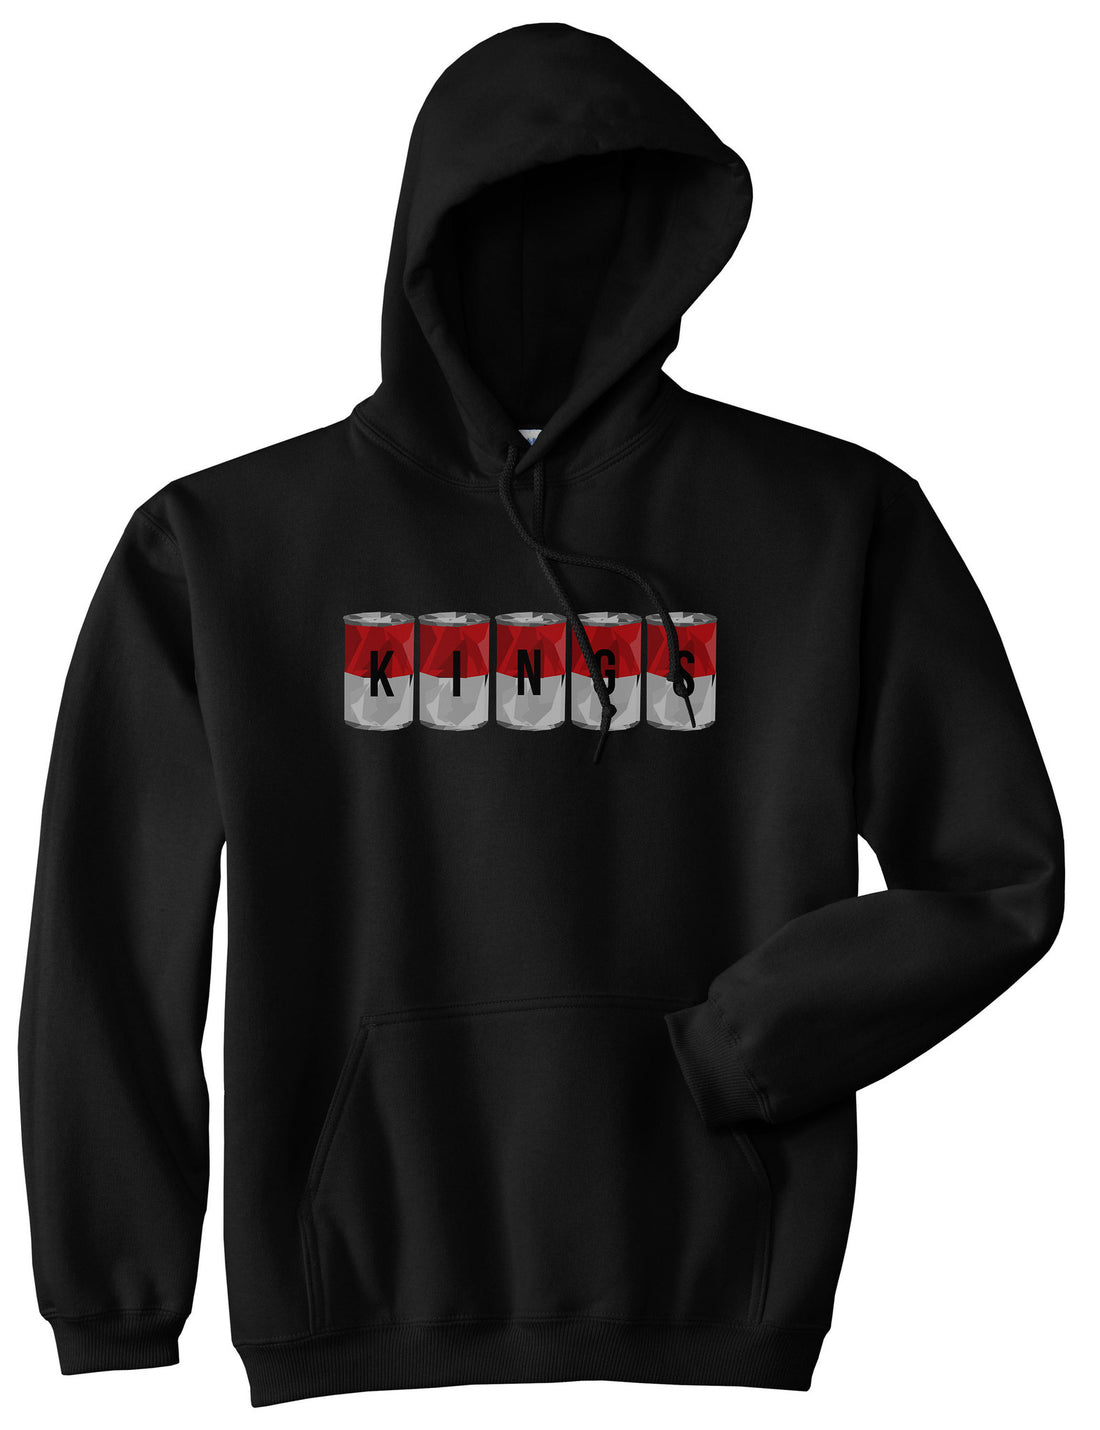 Tomato Soup Cans Pullover Hoodie in Black